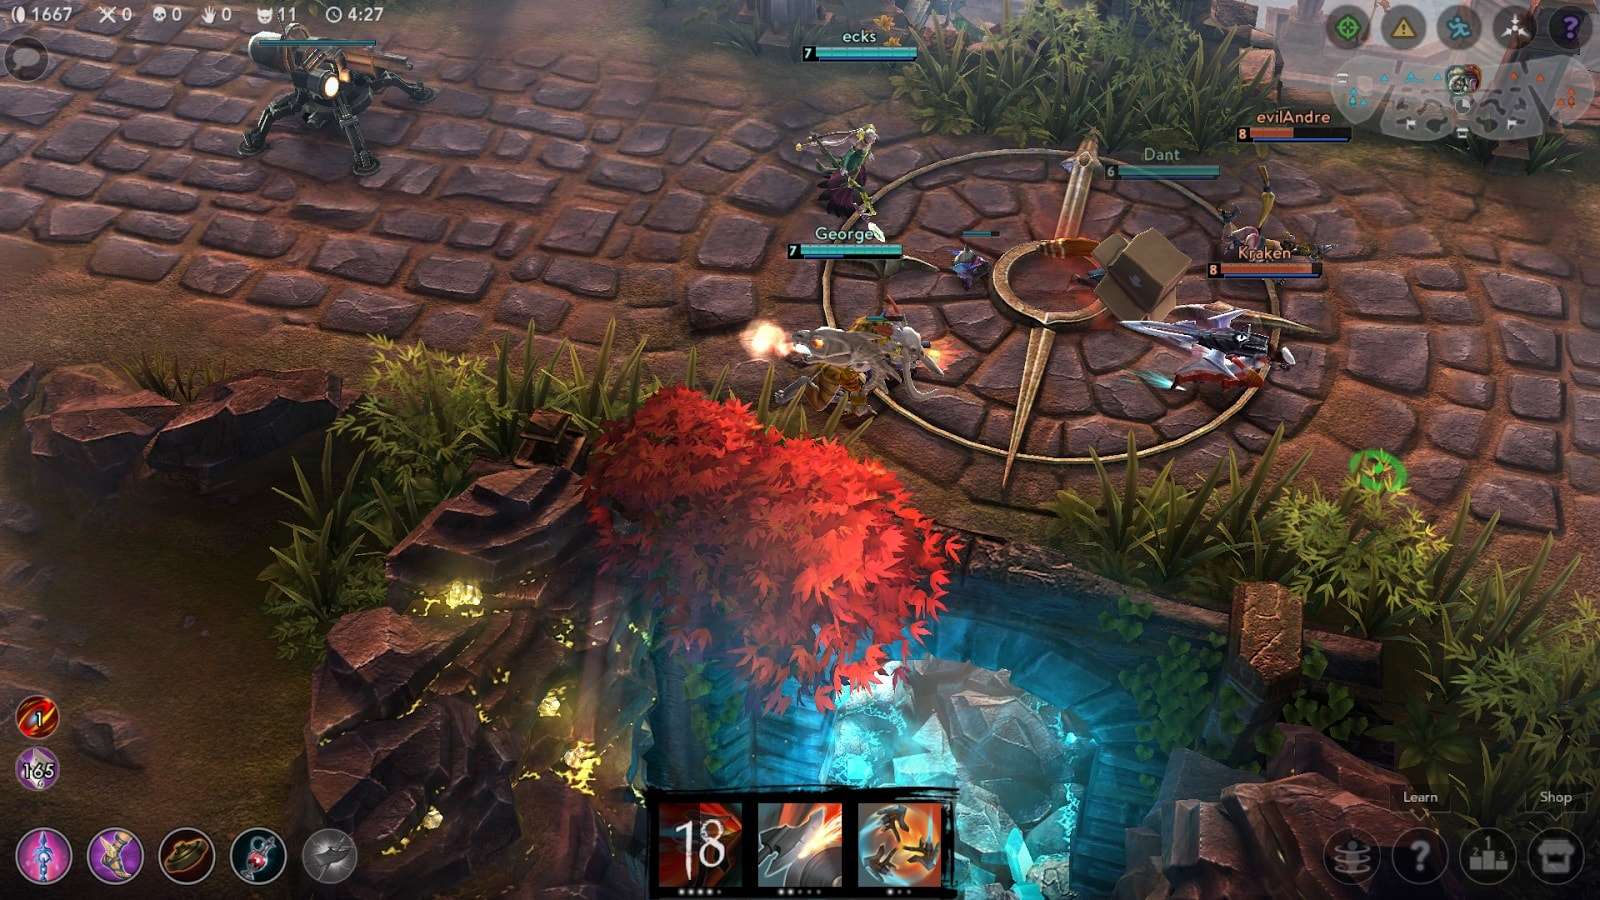 Vainglory - Top 10 Best Free Strategy Games for Android – 2018